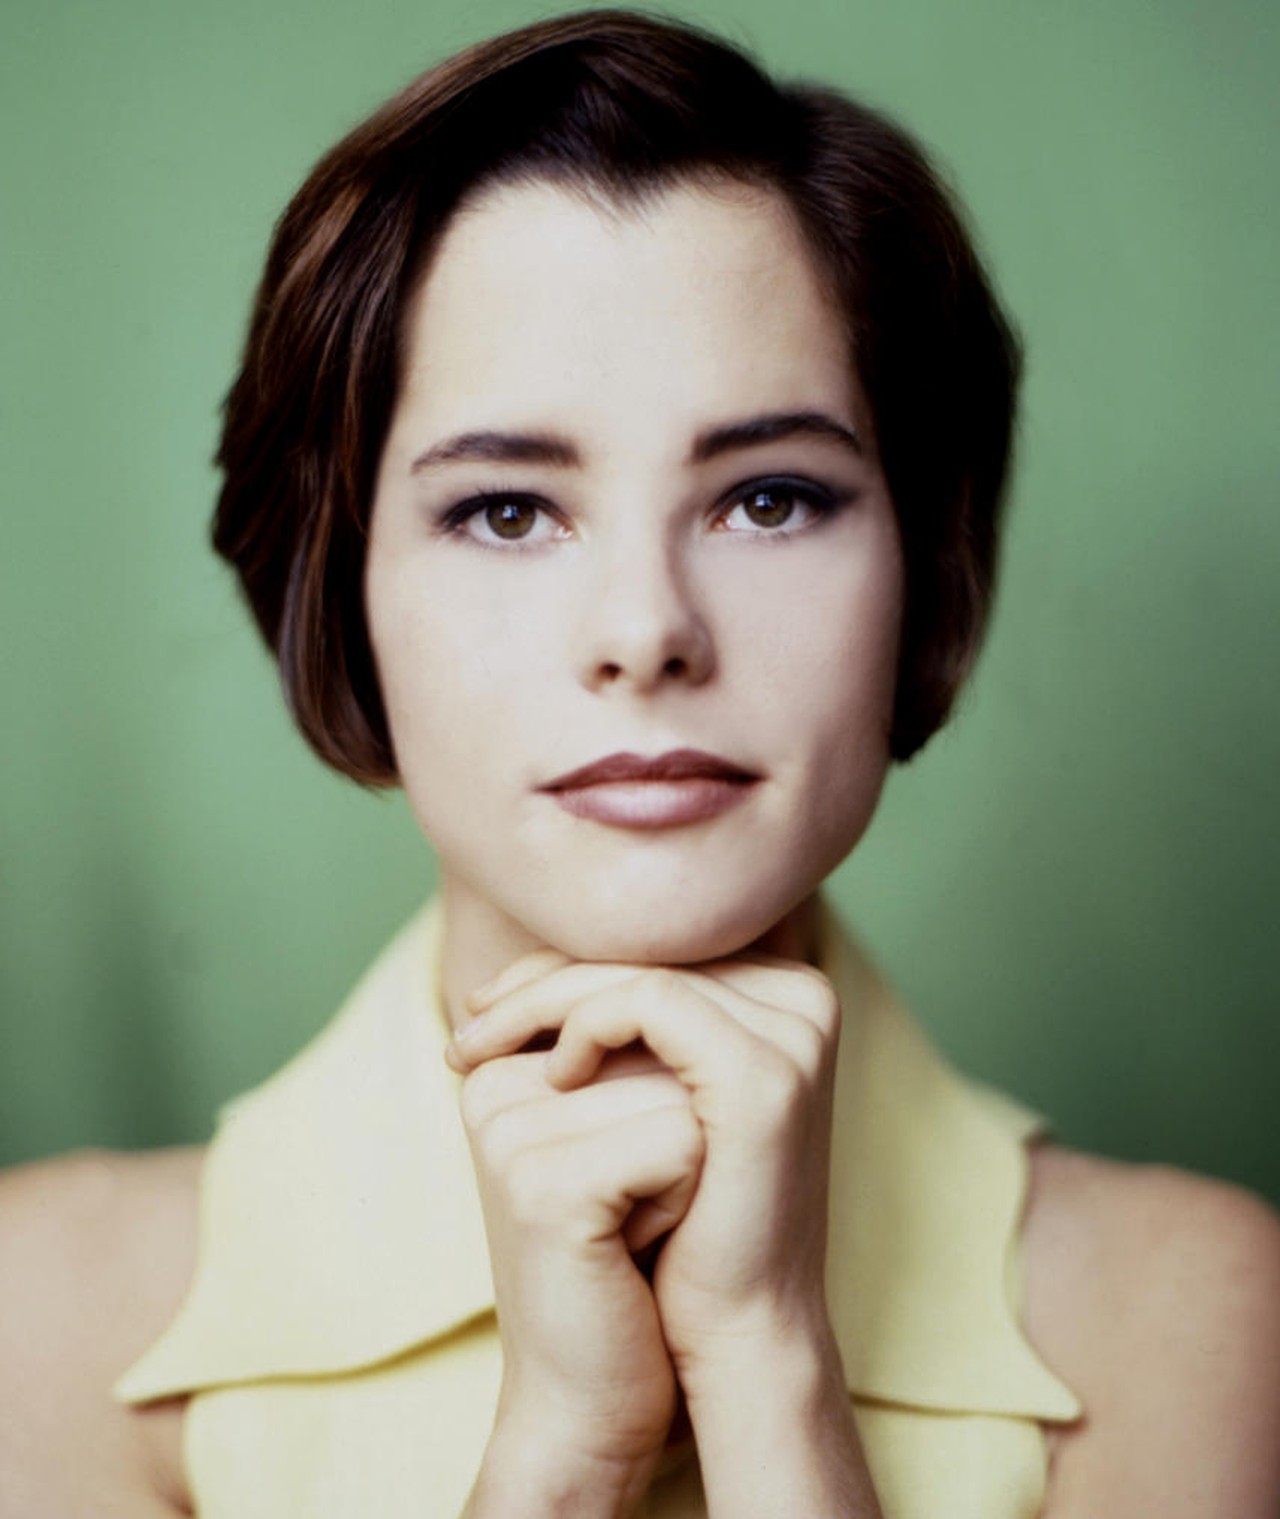 Posey pictures of parker Parker Posey